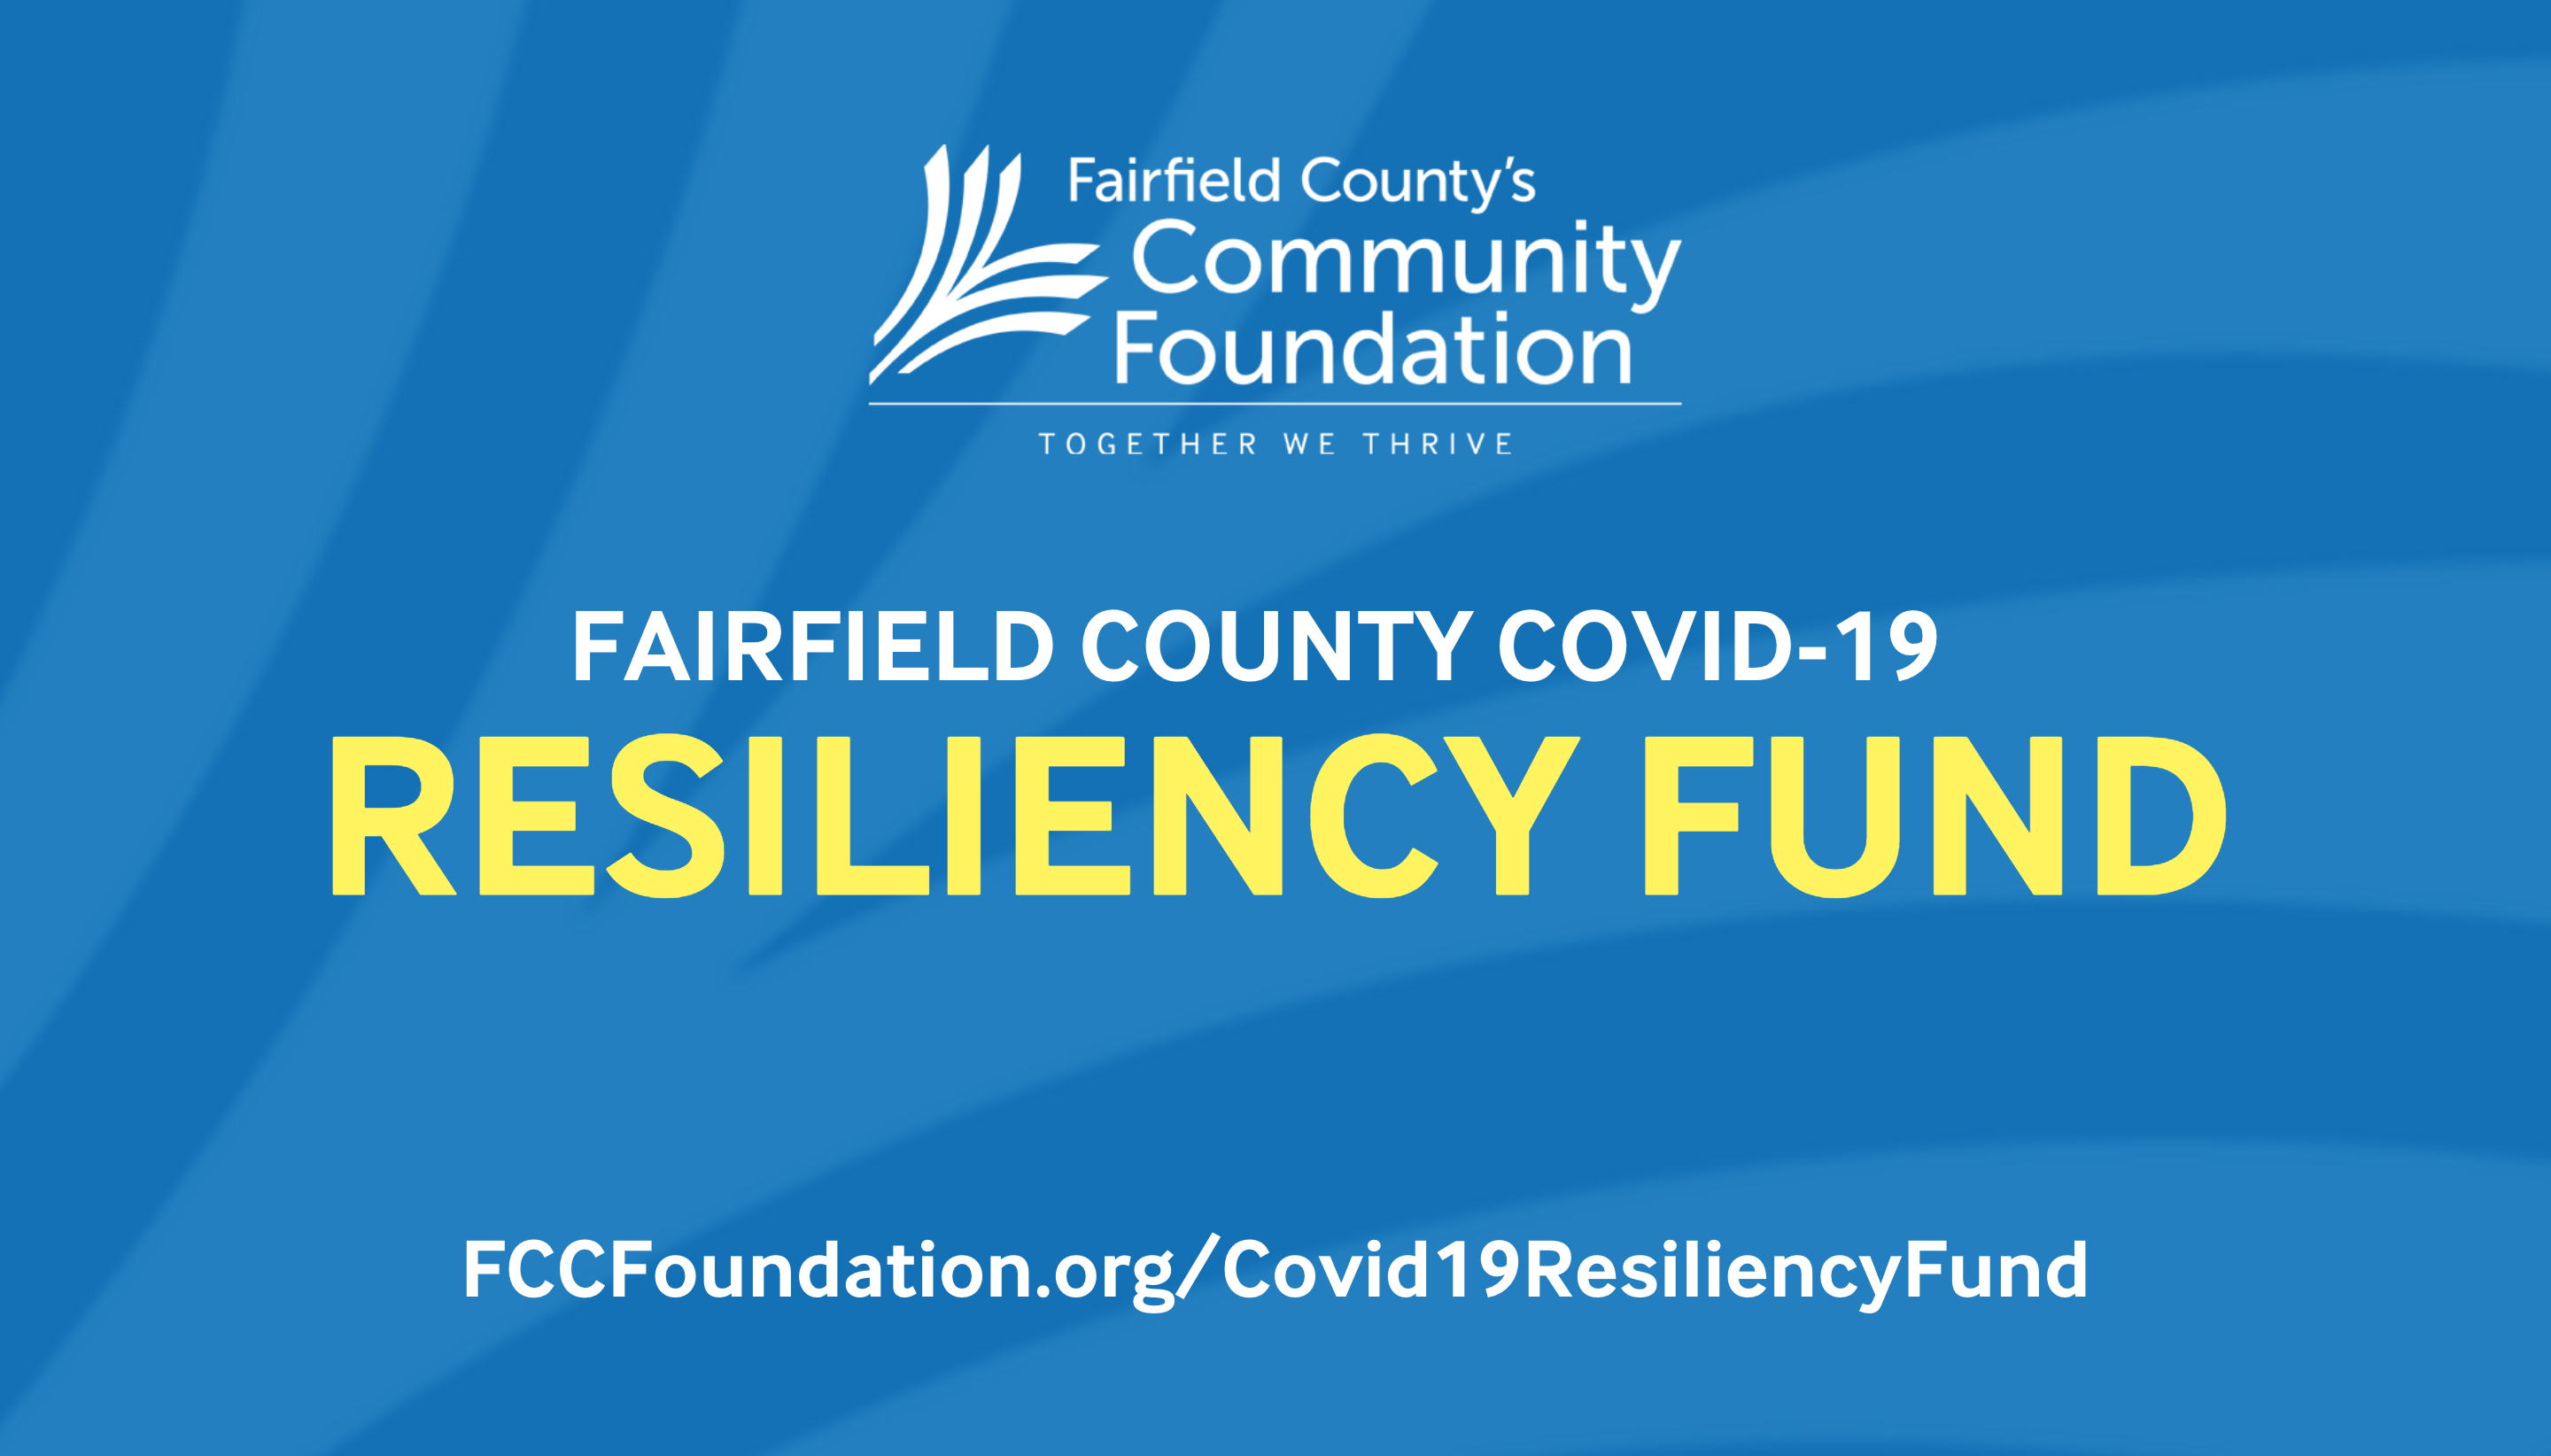 Fairfield County’s Community Foundation Announces New COVID-19 Resiliency Fund